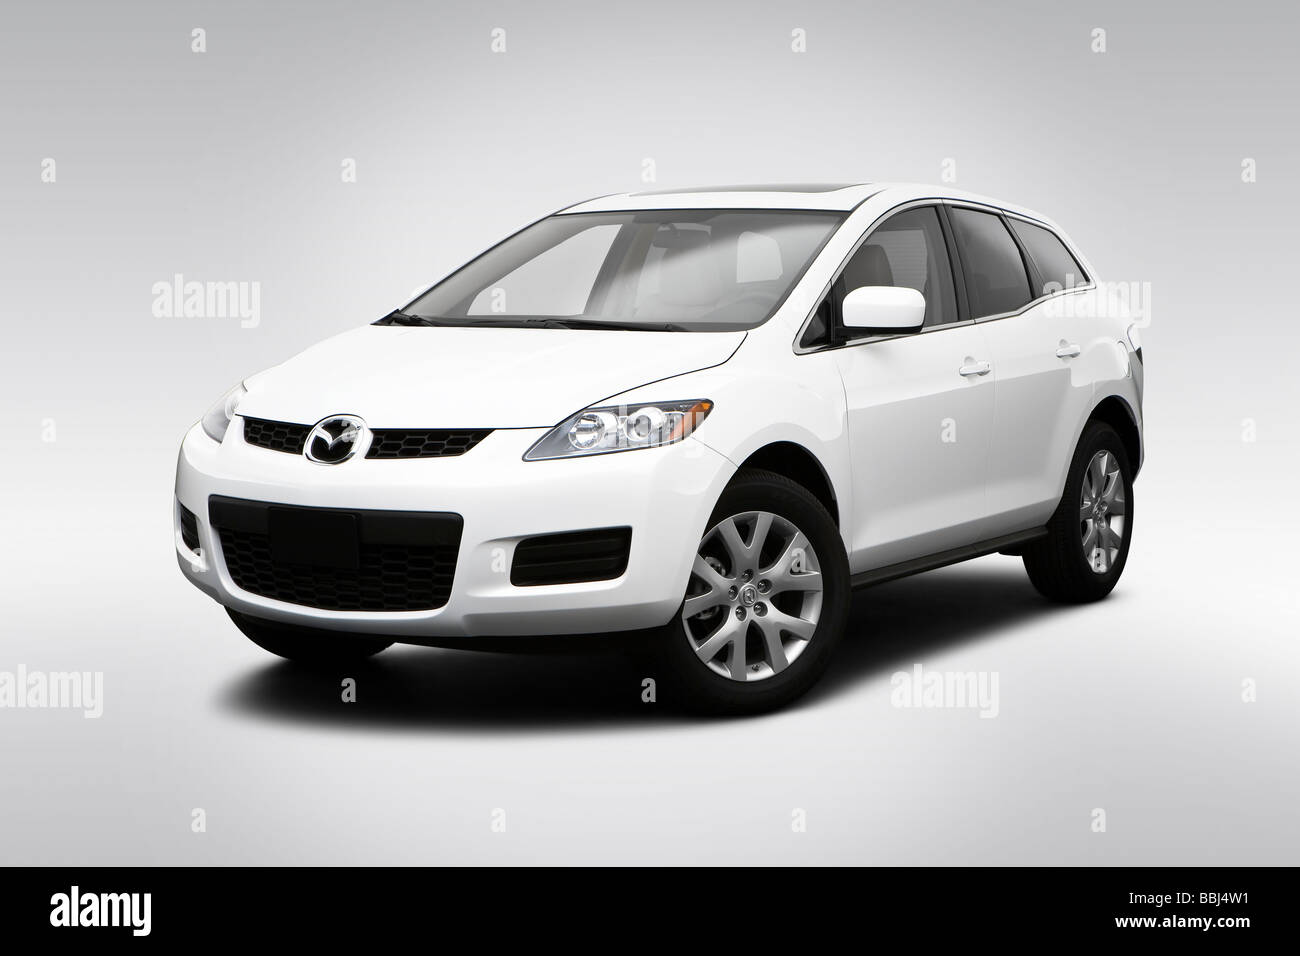 2009 Mazda CX-7 Touring in White - Front angle view Stock Photo - Alamy